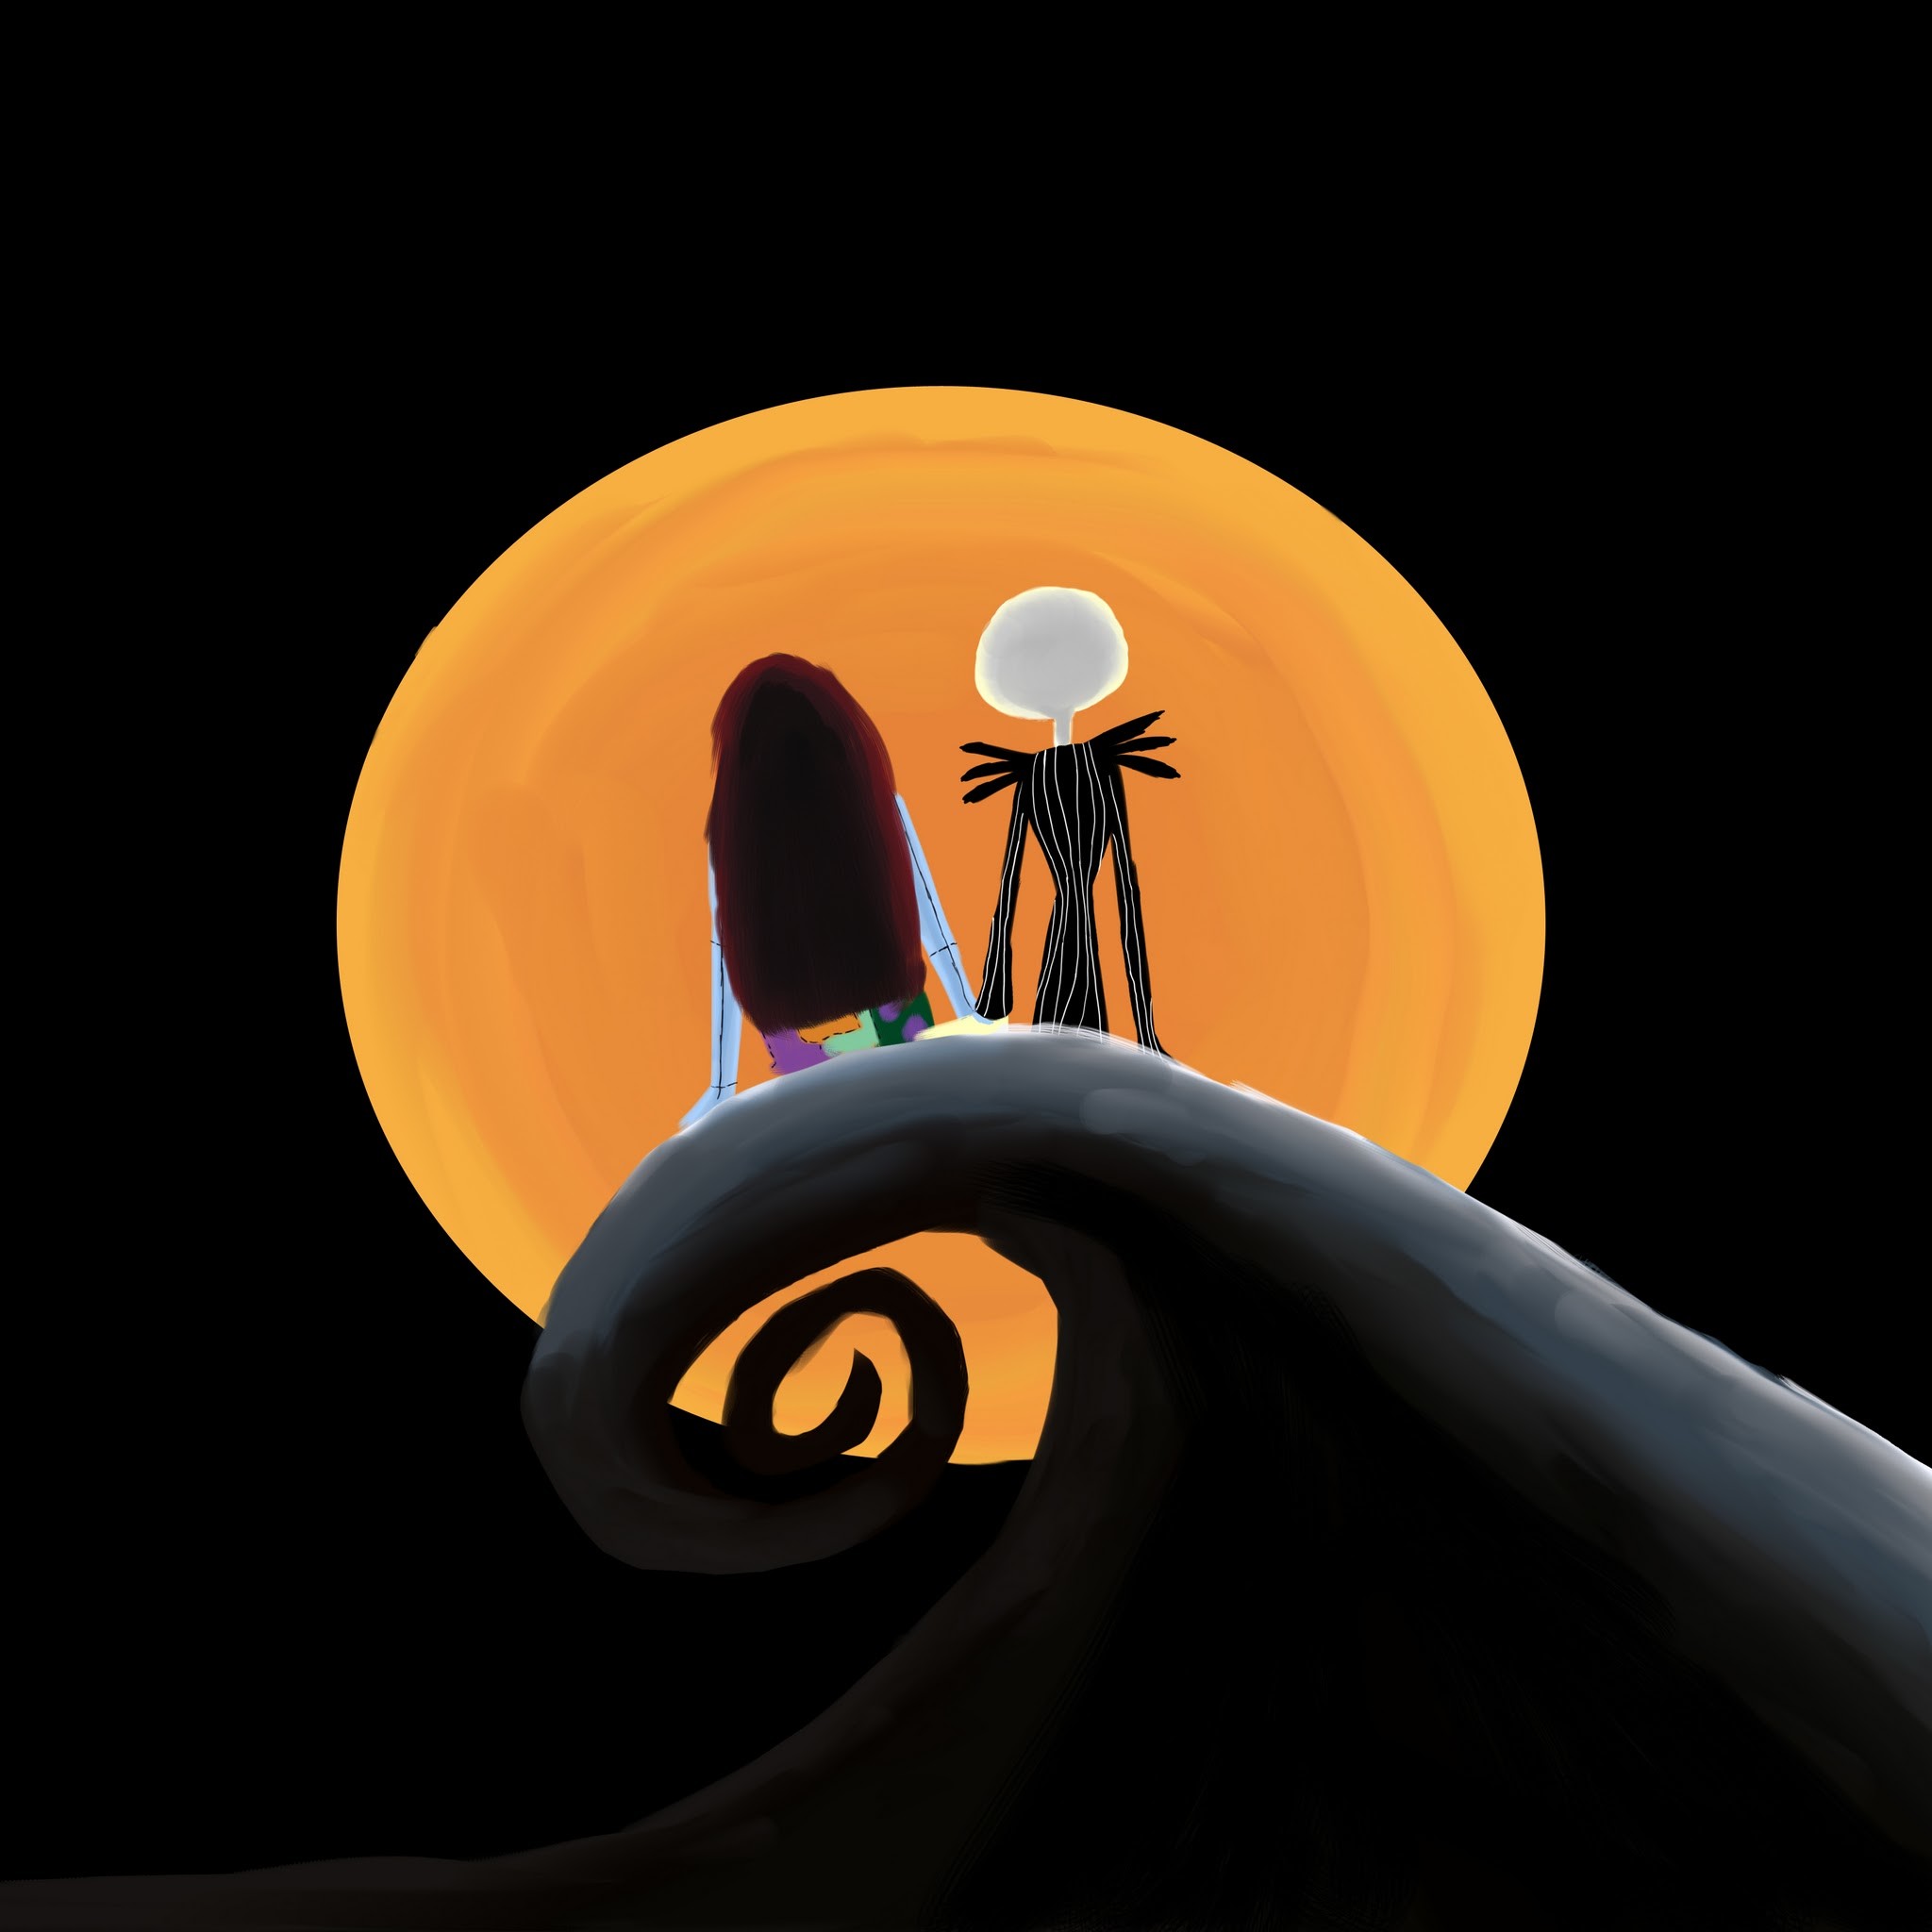 2048x2048 Jack and Sally by monicacarolinee Jack and Sally by monicacarolinee